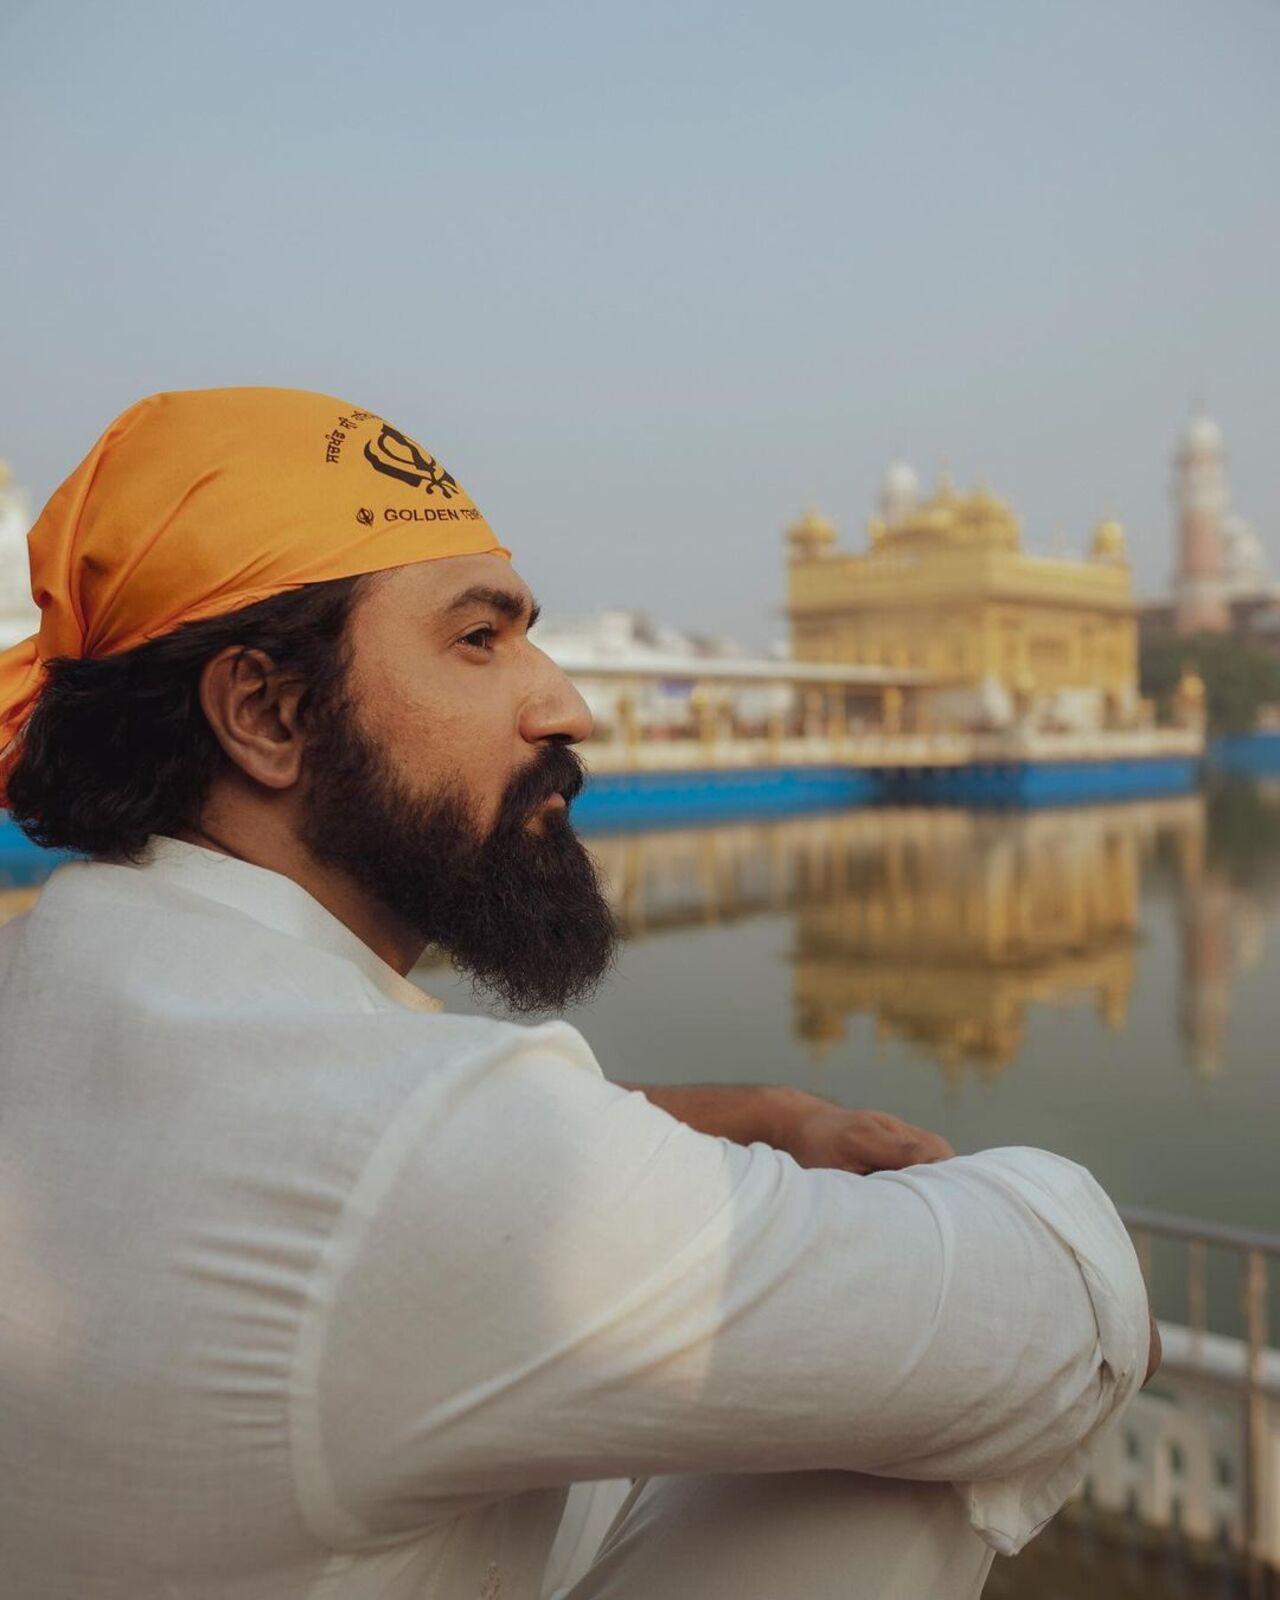 Amid the chaotic promotion schedule, Vicky takes a moment to relax and soak in the divinity of the Golden temple